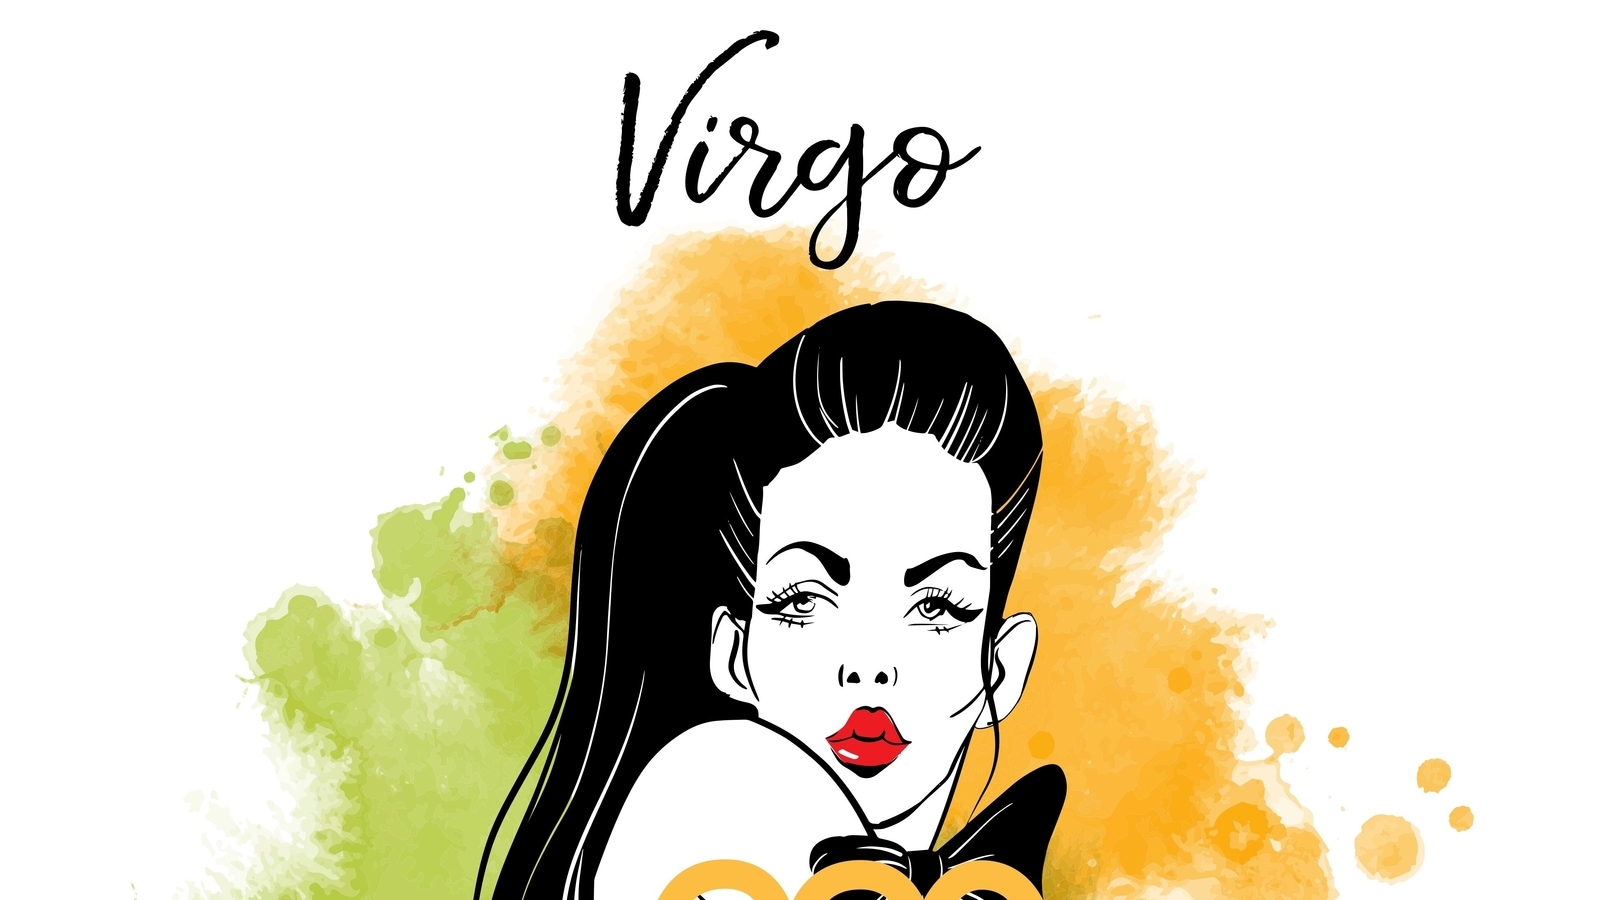 Virgo Daily Horoscope for October 12: Health will discomfort you